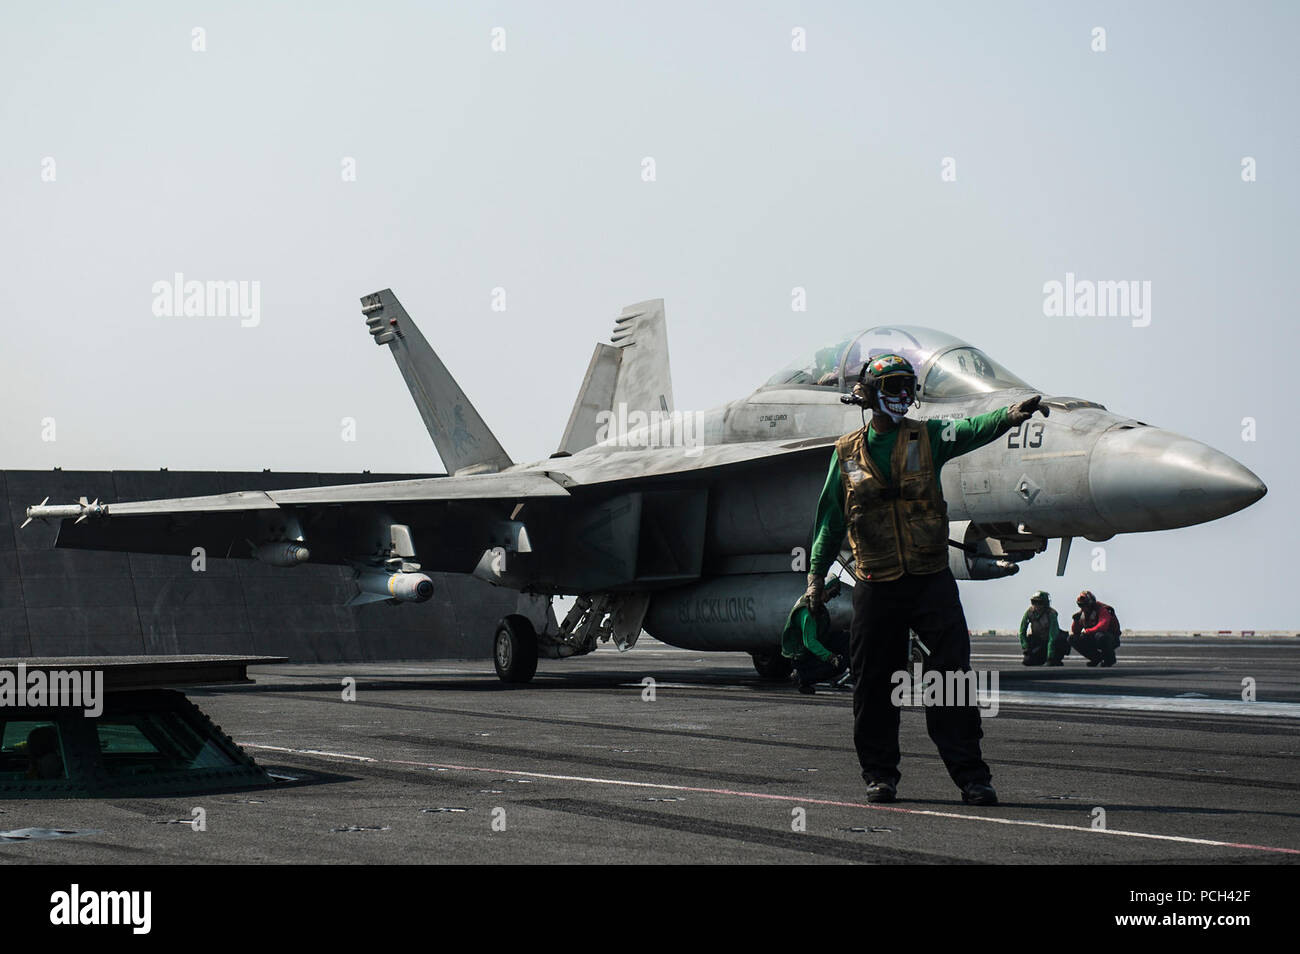 A U.S. Navy F/A-18F Super Hornet aircraft assigned to Strike Fighter Squadron (VFA) 213 prepares to launch from the aircraft carrier USS George H.W. Bush (CVN 77) Sept. 1, 2014, in the Persian Gulf. The George H.W. Bush was supporting maritime security operations and theater security cooperation efforts in the U.S. 5th Fleet area of responsibility. Stock Photo